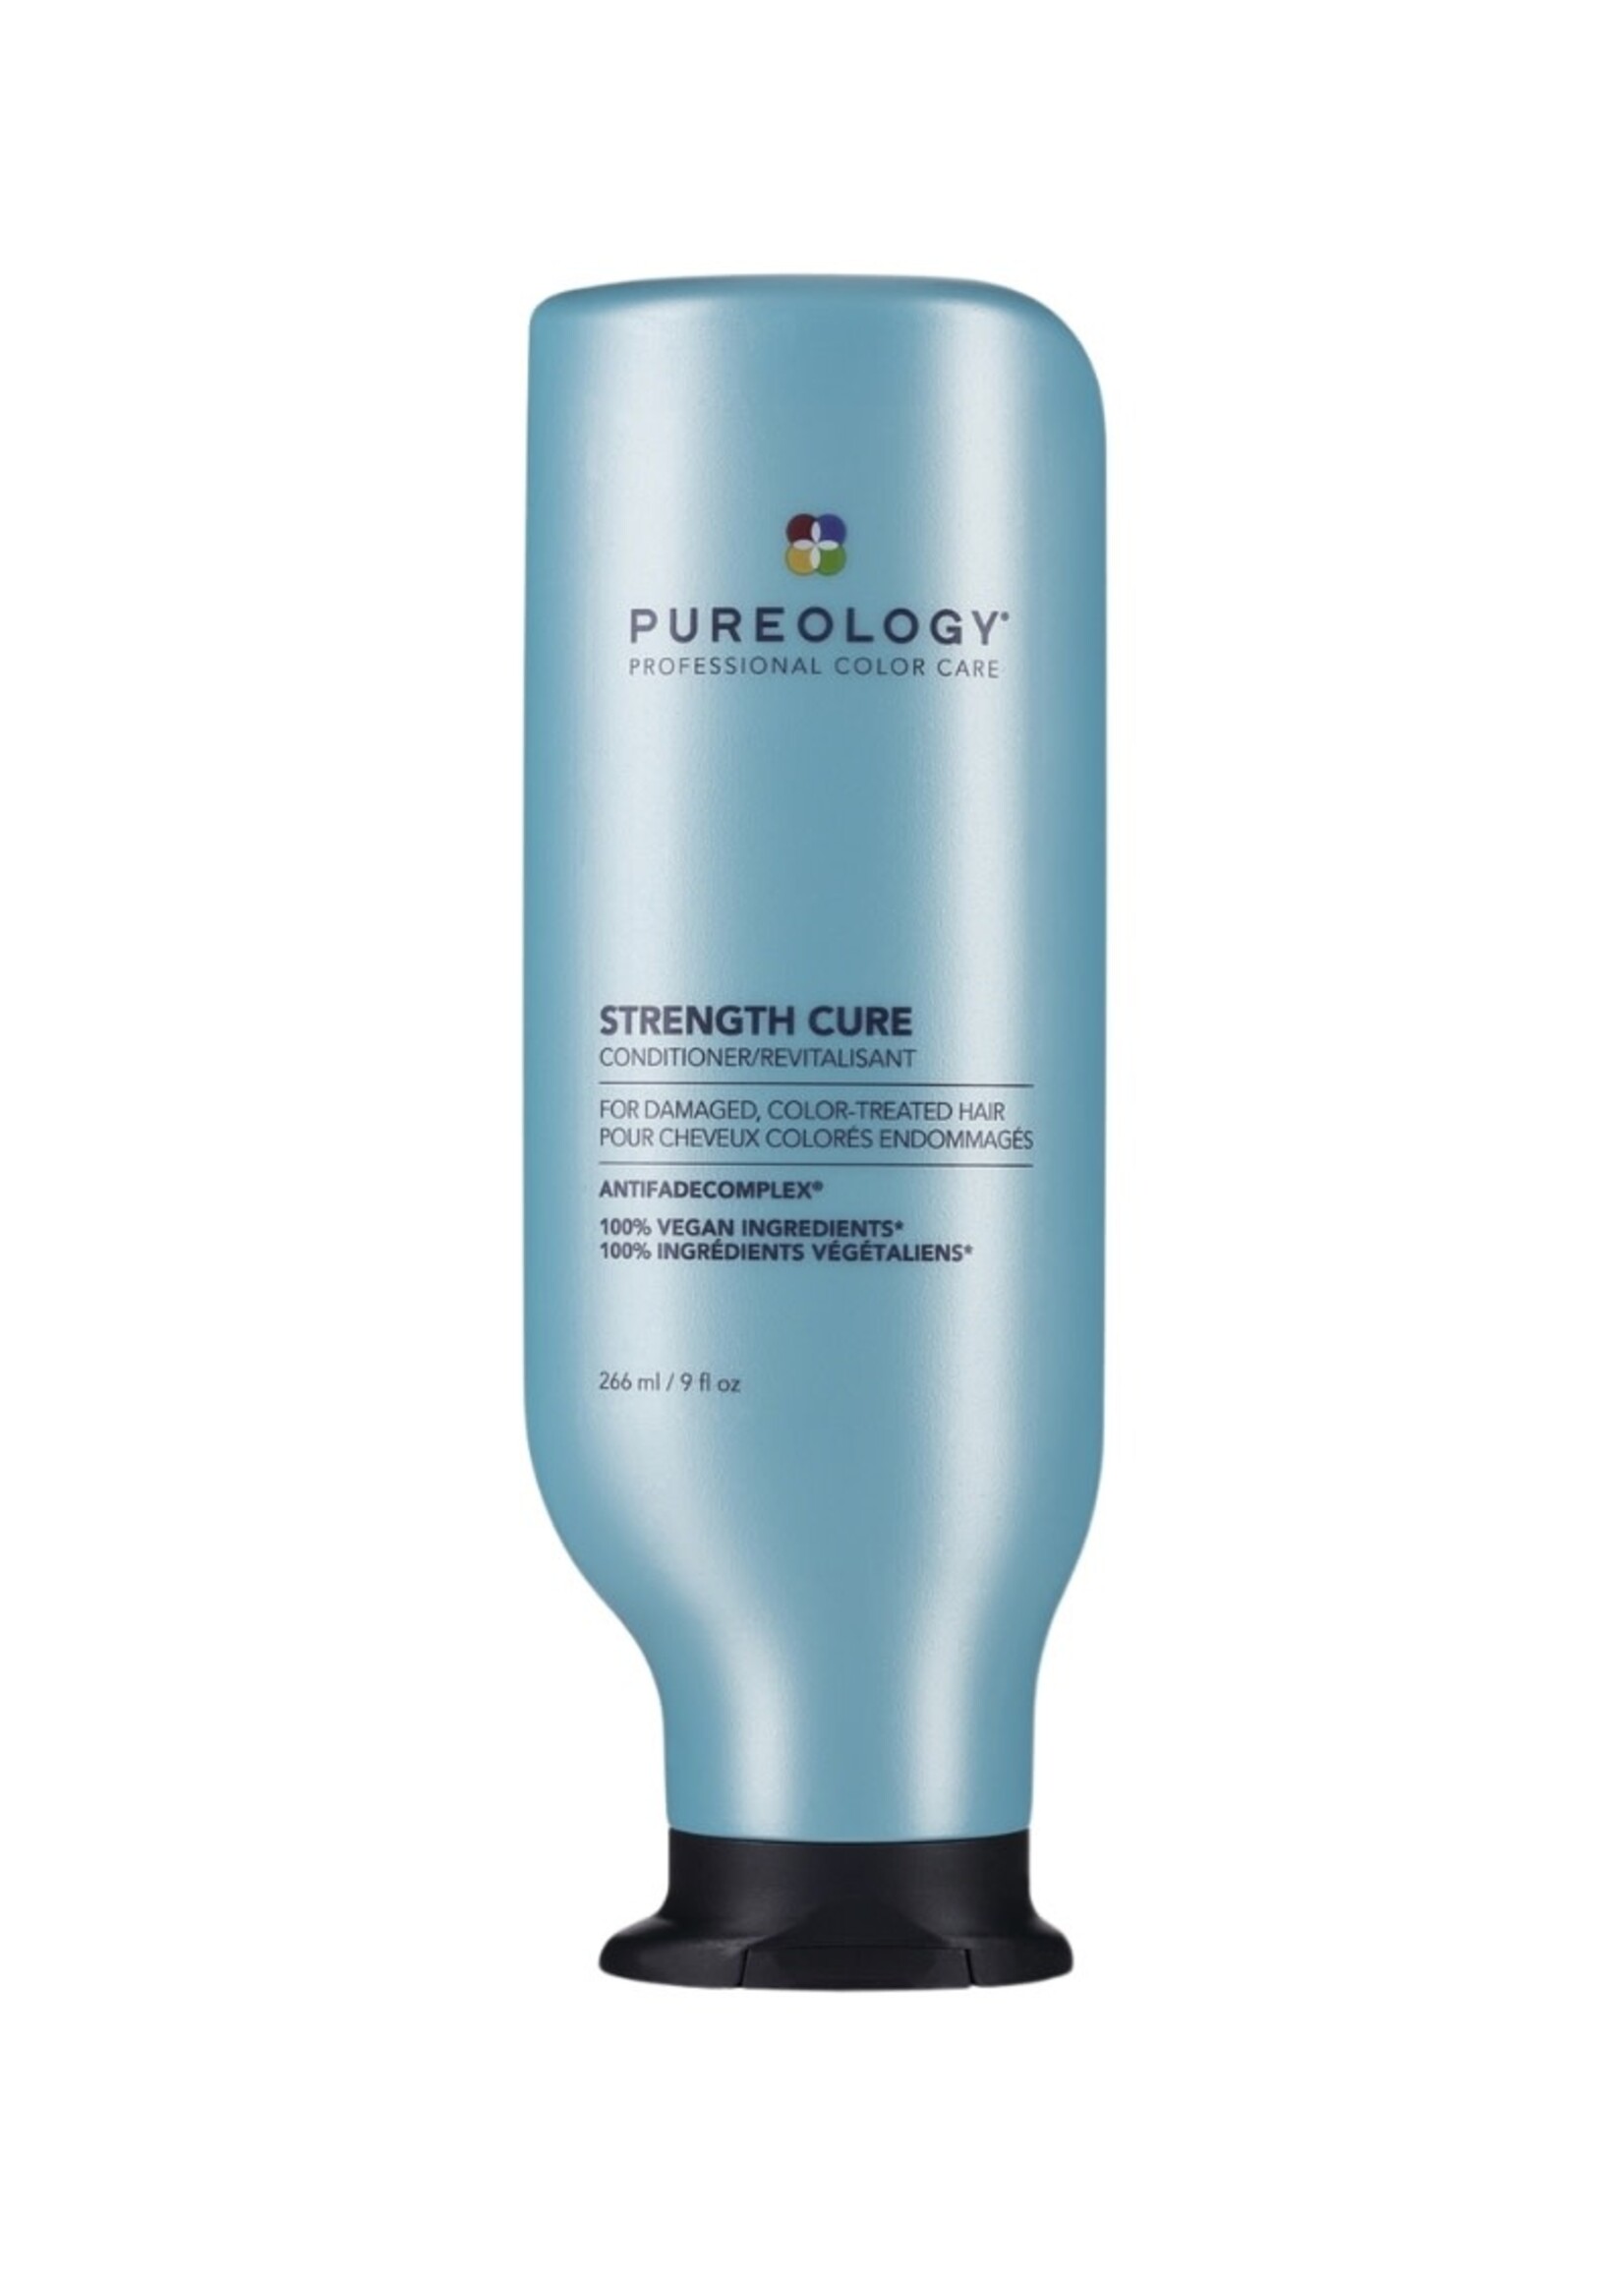 Pureology Pureology Strength Cure Conditioner 266ml